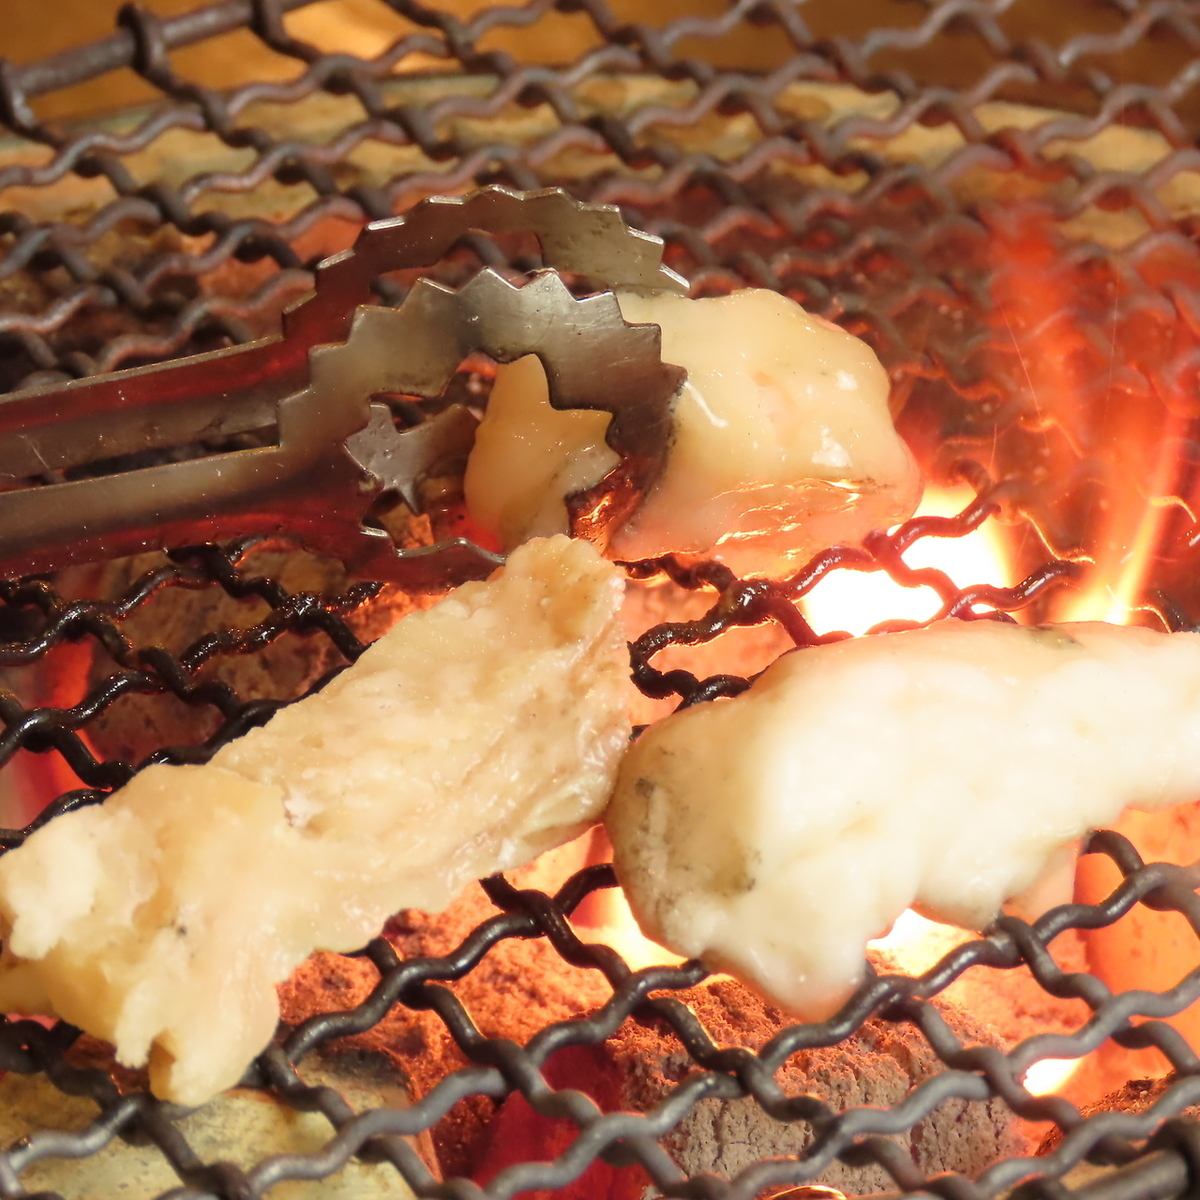 Enjoy fresh offal and yakiniku! We have plenty of seating available for families and banquets.